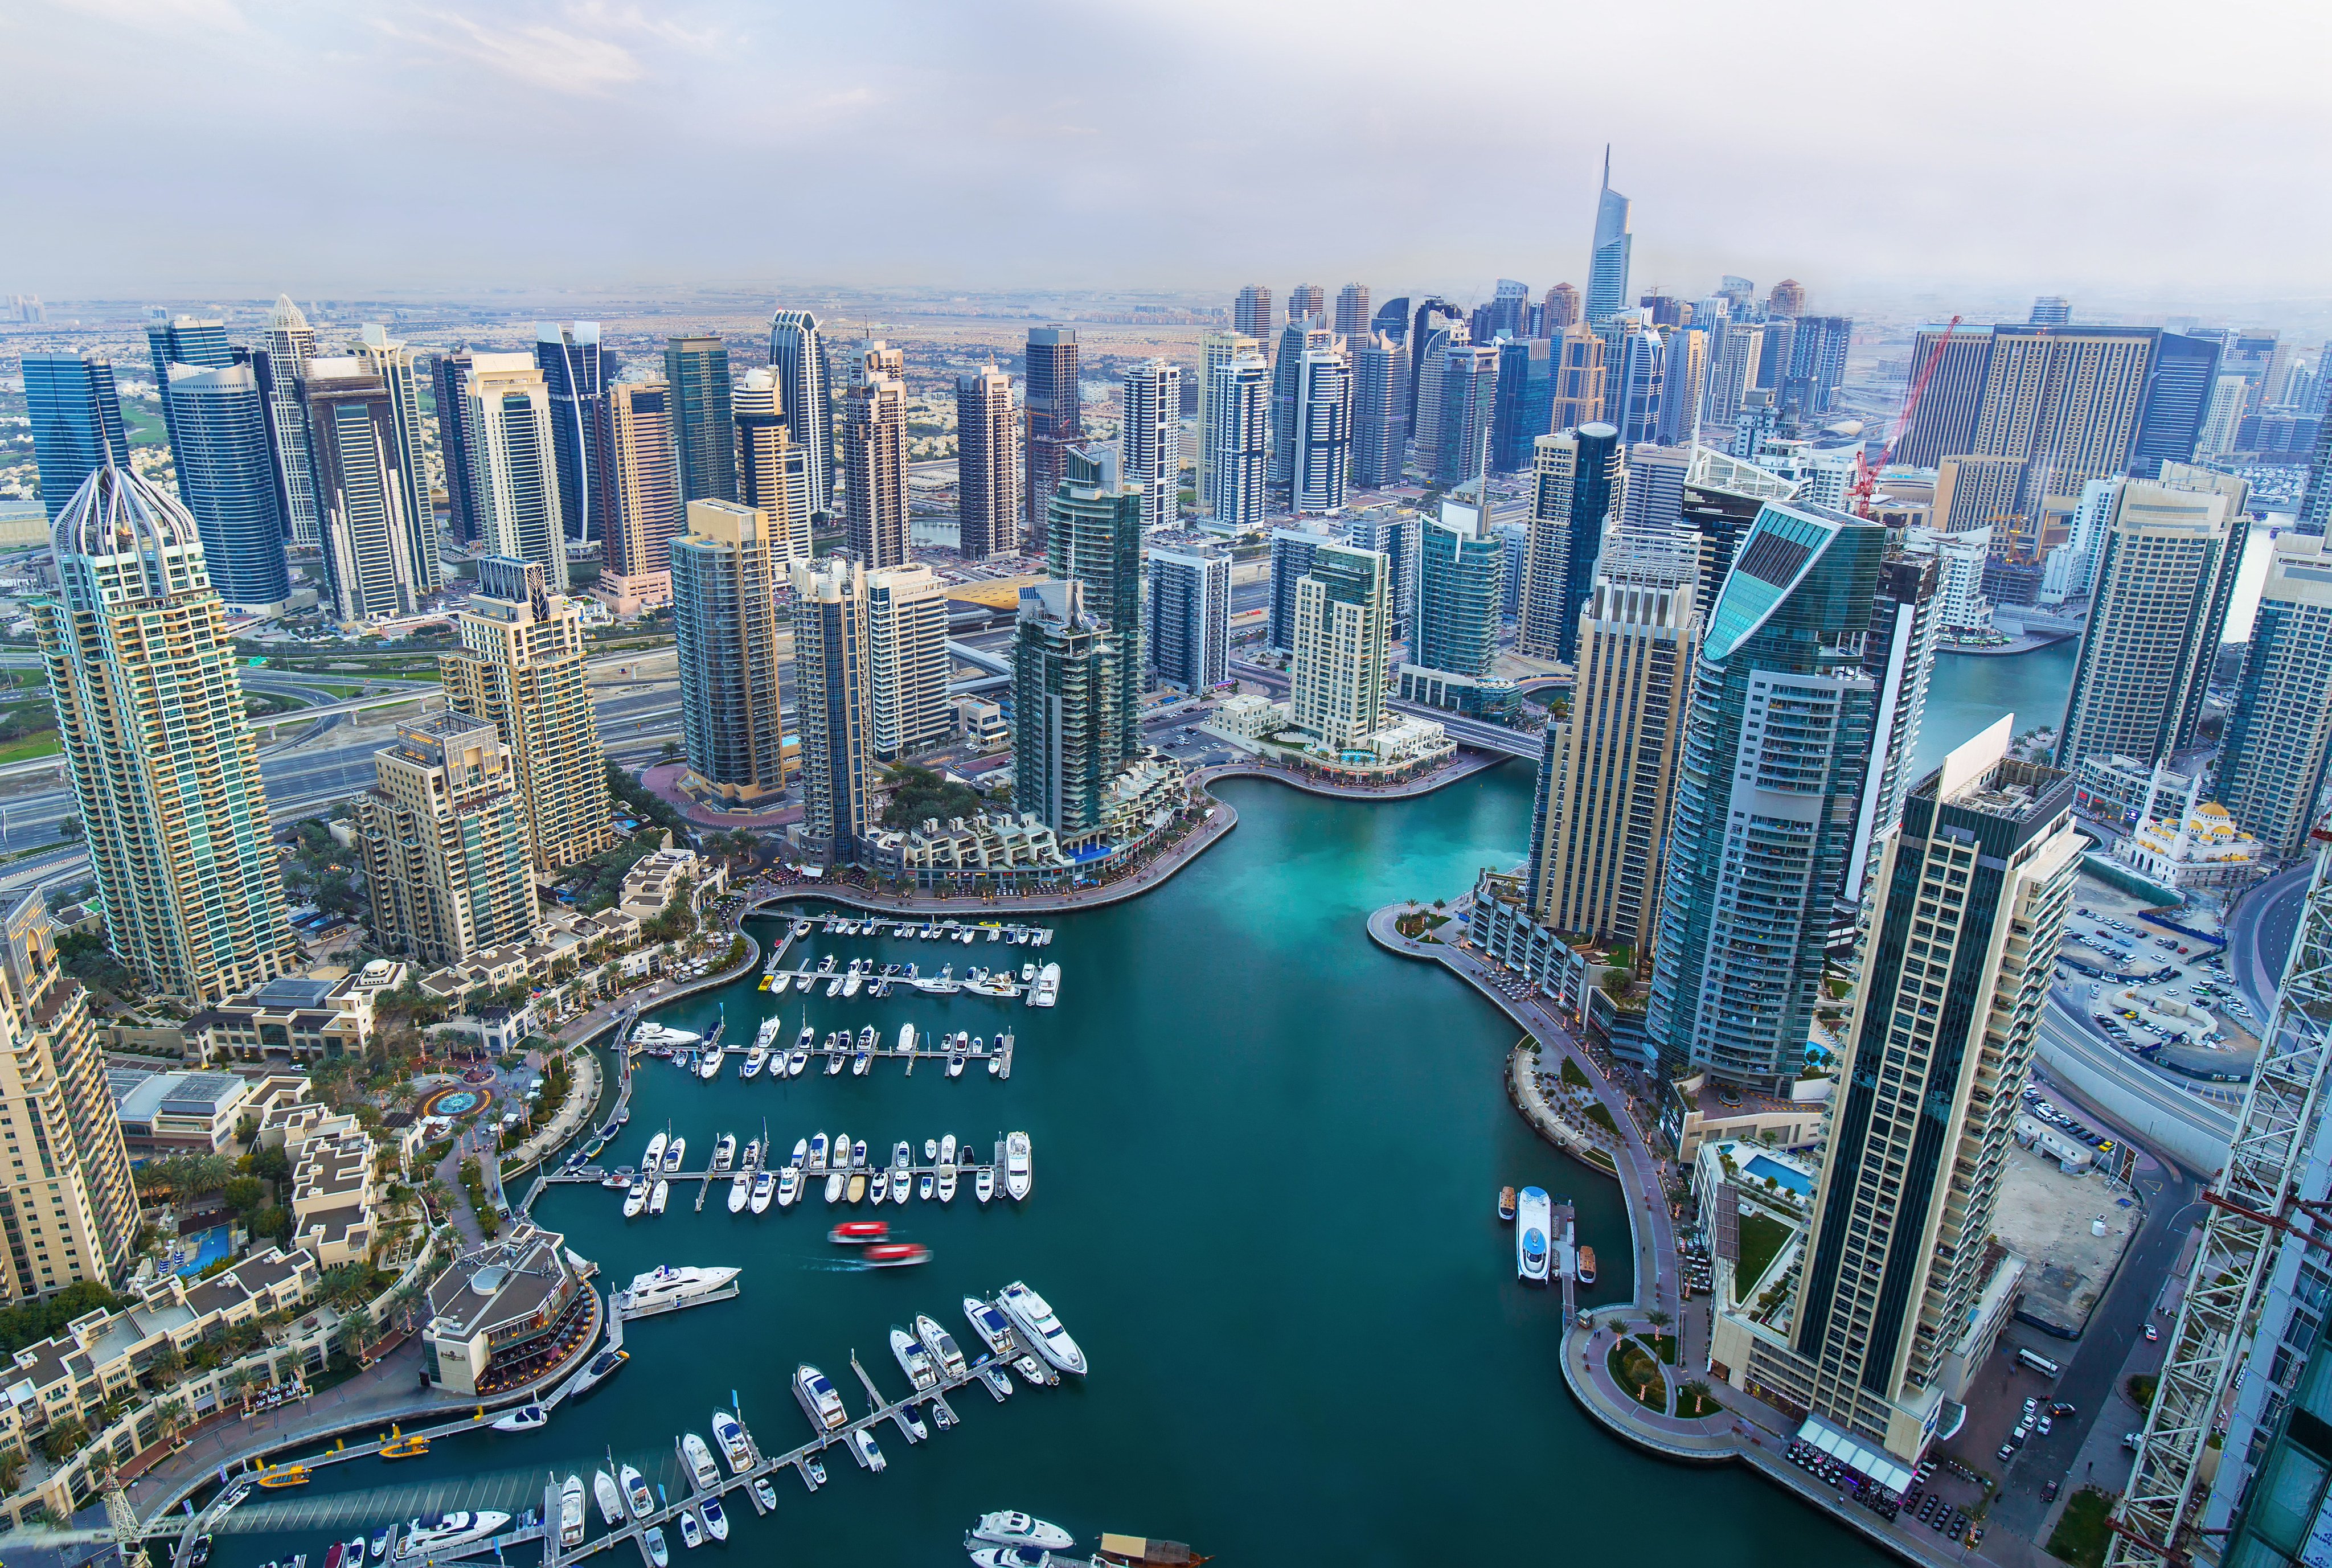 A view of residential skyscrapers in  Dubai Marina, Dubai. The UAE’s glitzy financial hub is drawing wealthy property investors despite soaring prices. Photo: Shutterstock